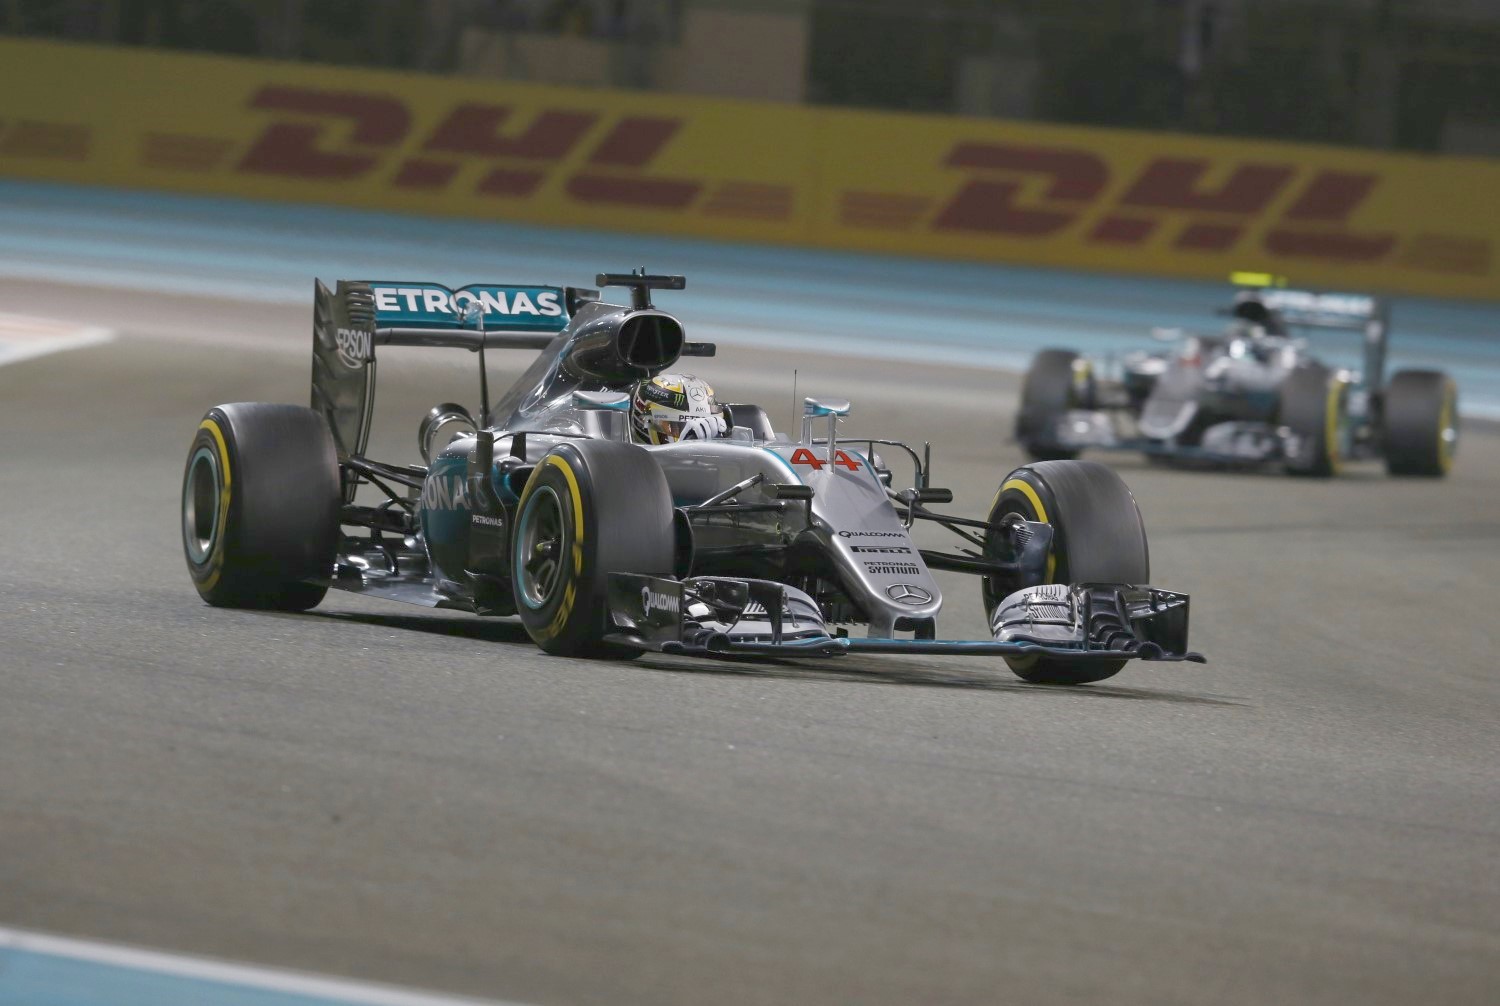 Hamilton should back up Rosberg every race - made it more exciting to watch